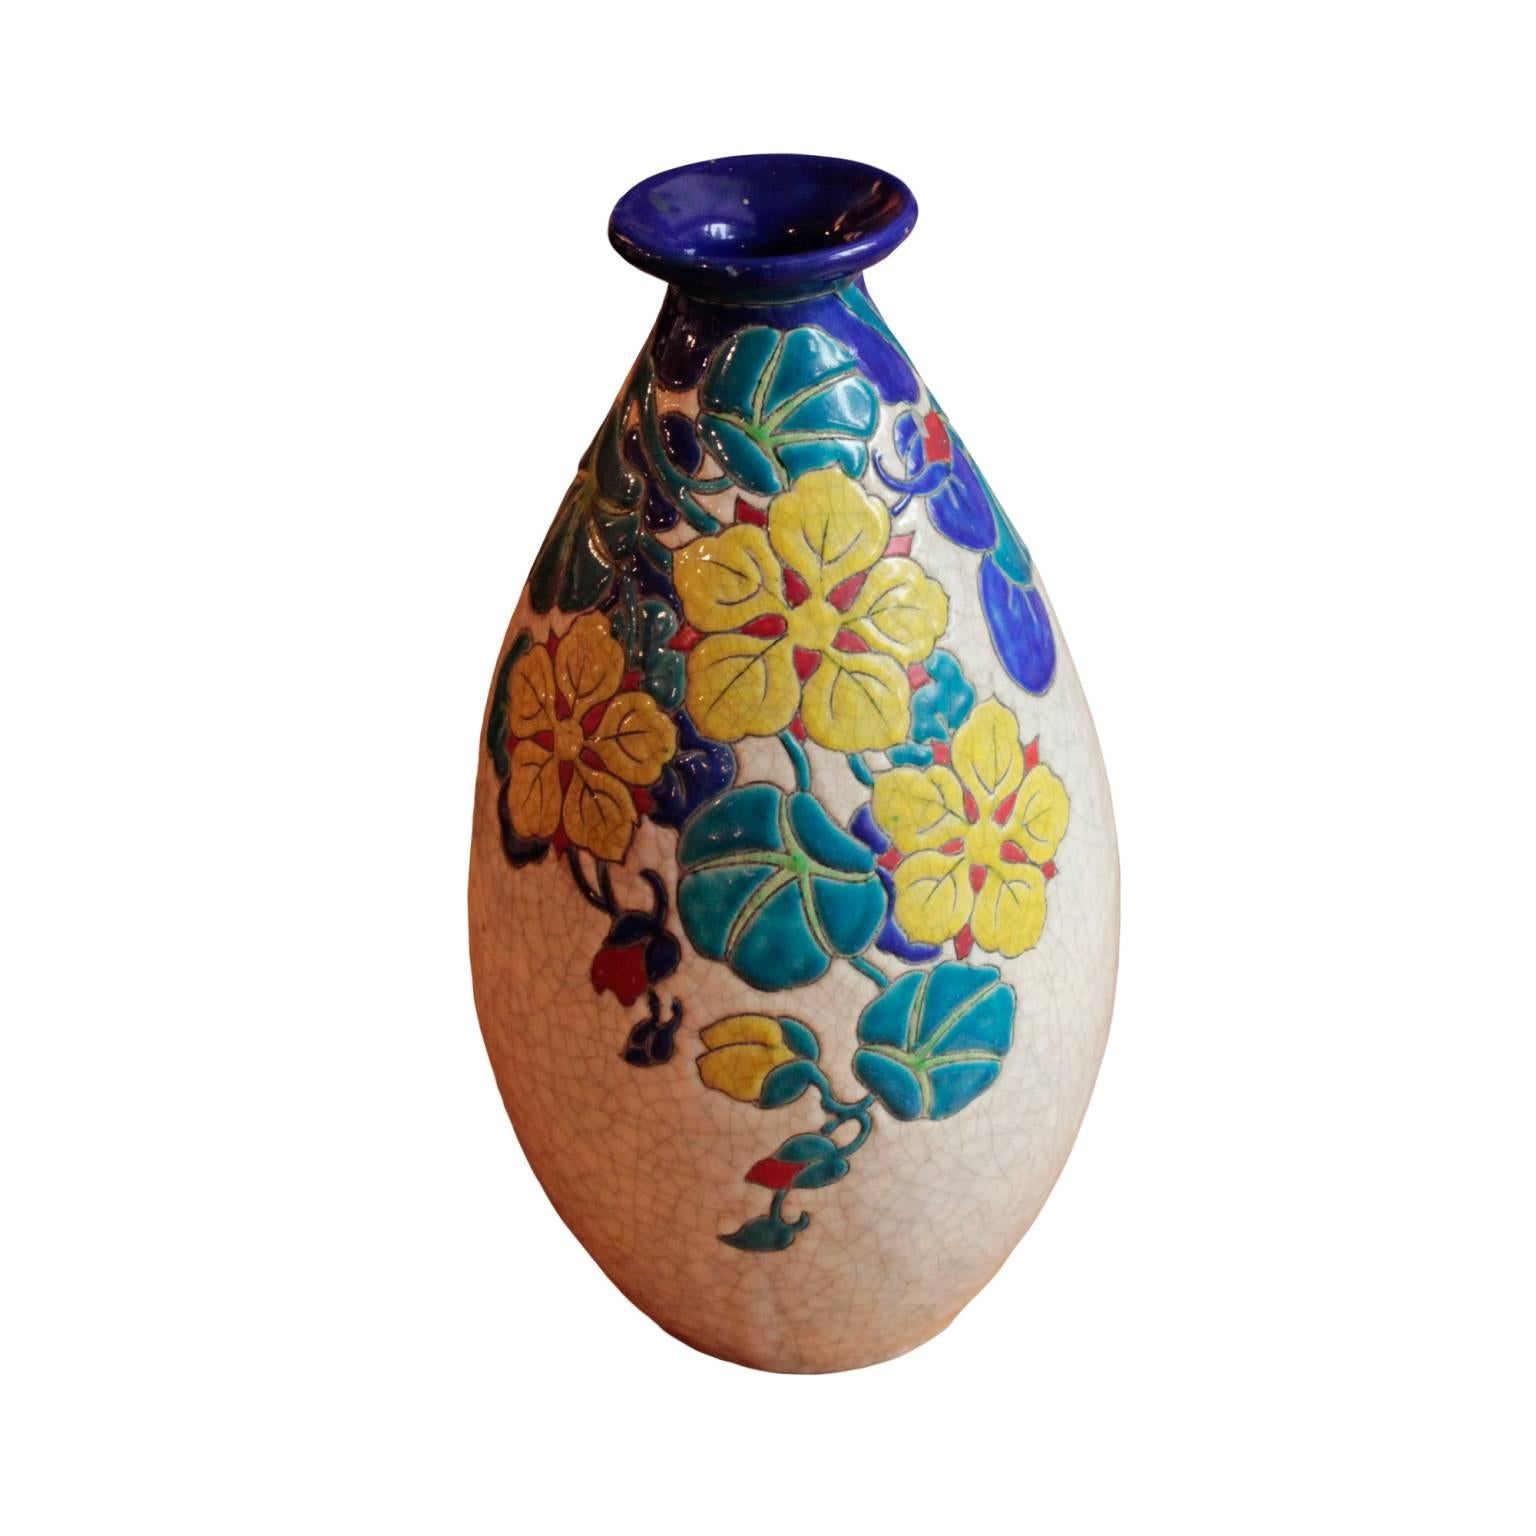 Belgian Art Deco Period Vase by Boch Freres Keramis In Excellent Condition For Sale In Hudson, NY